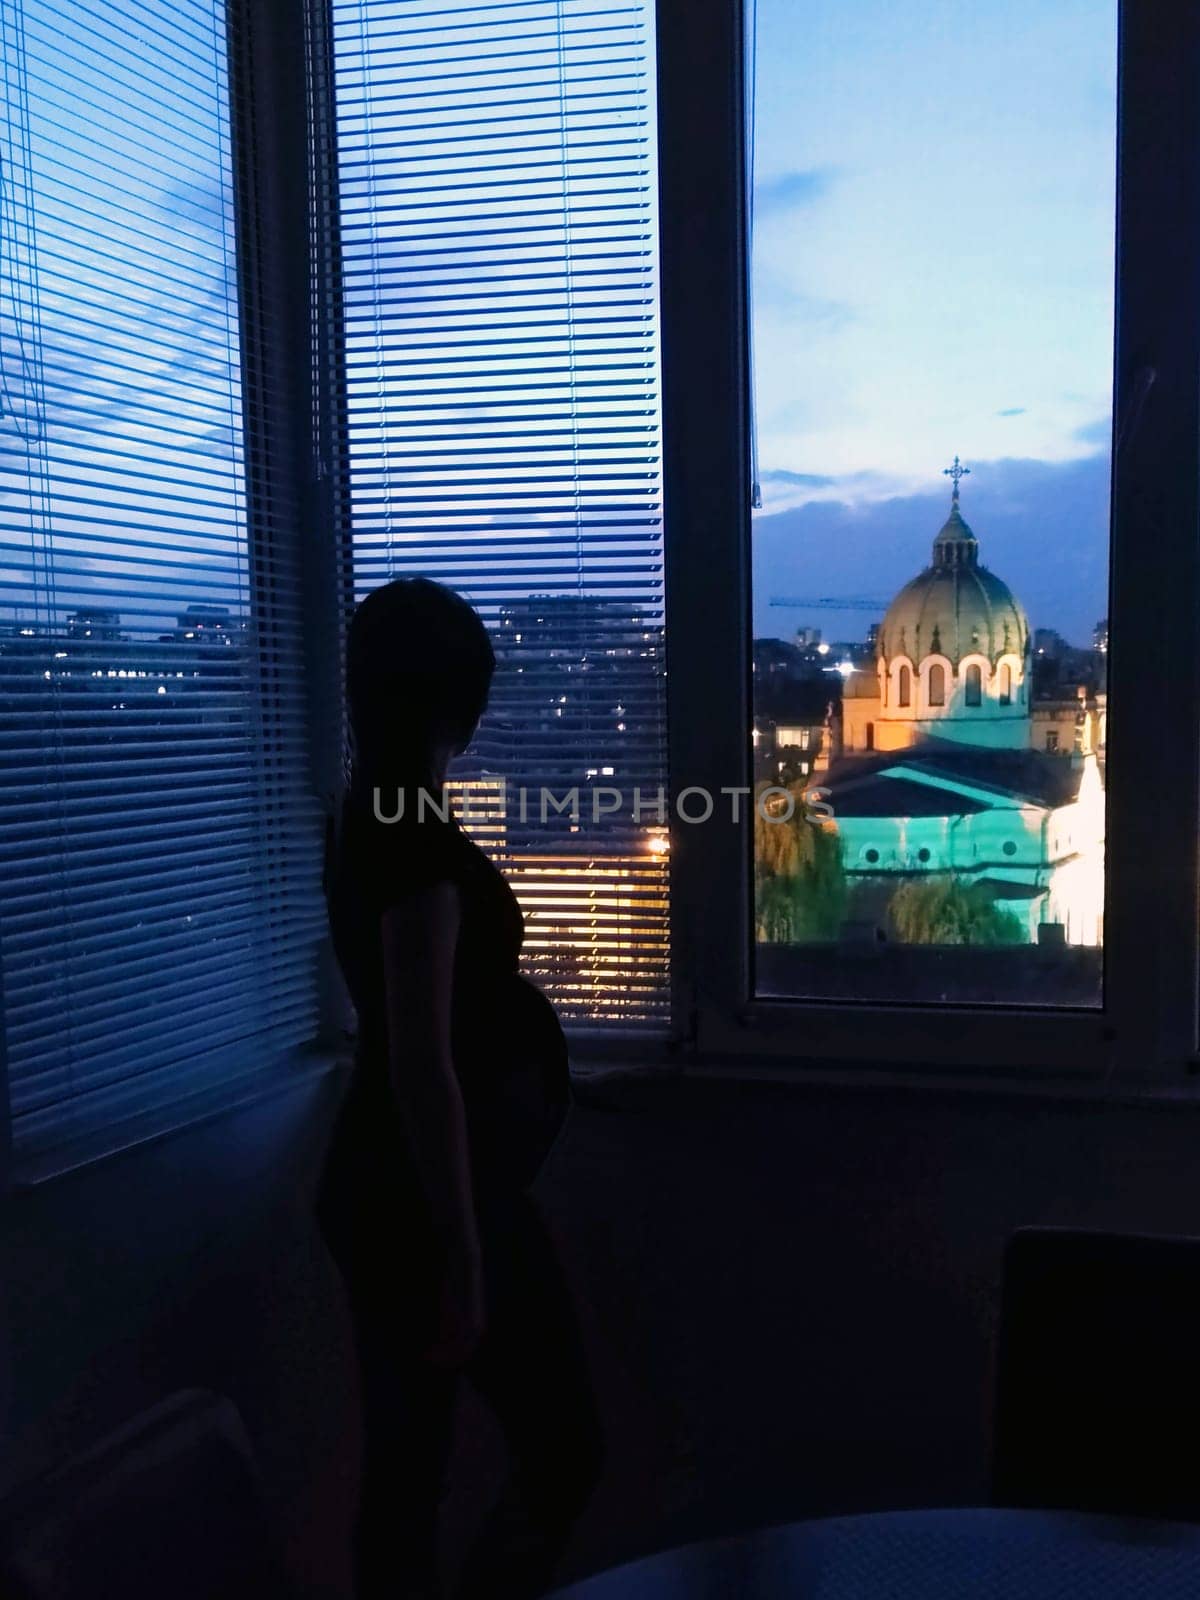 a pregnant woman thoughtfully looks out the window at the cathedral in the evening.